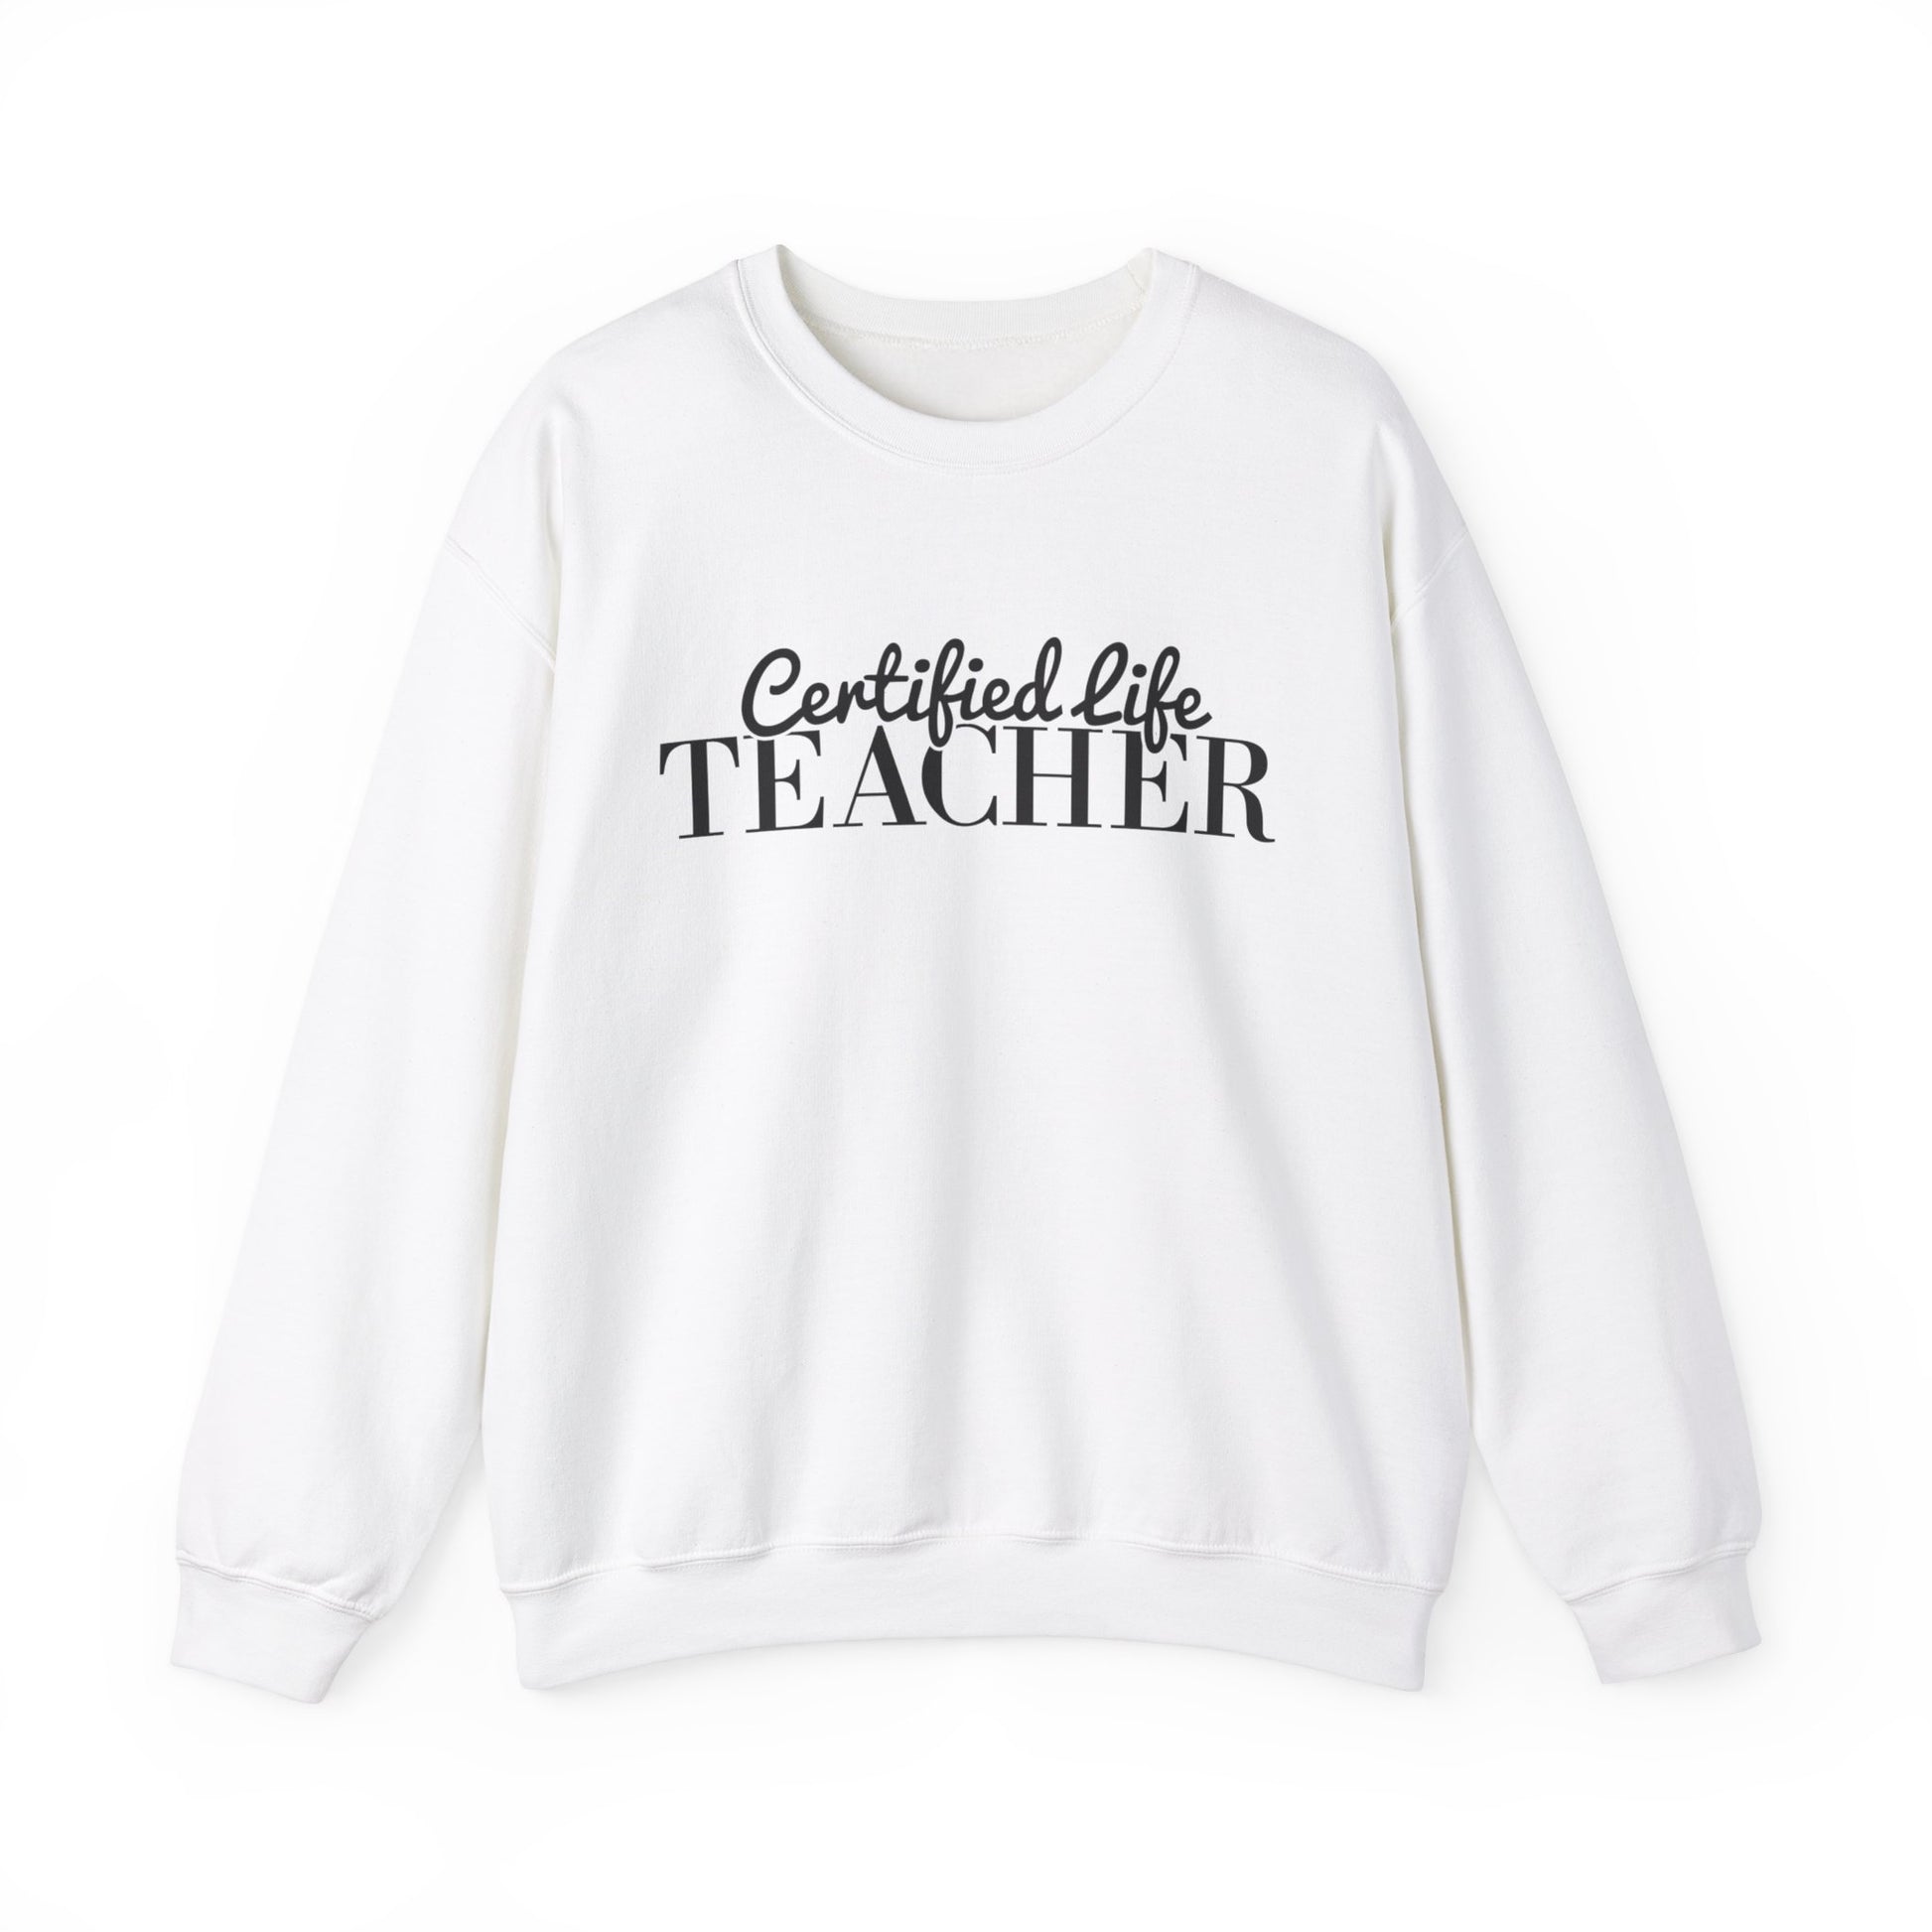 Images showcasing the sweatshirt being worn by a homeschooling parent, perhaps in a teaching setting or casually.